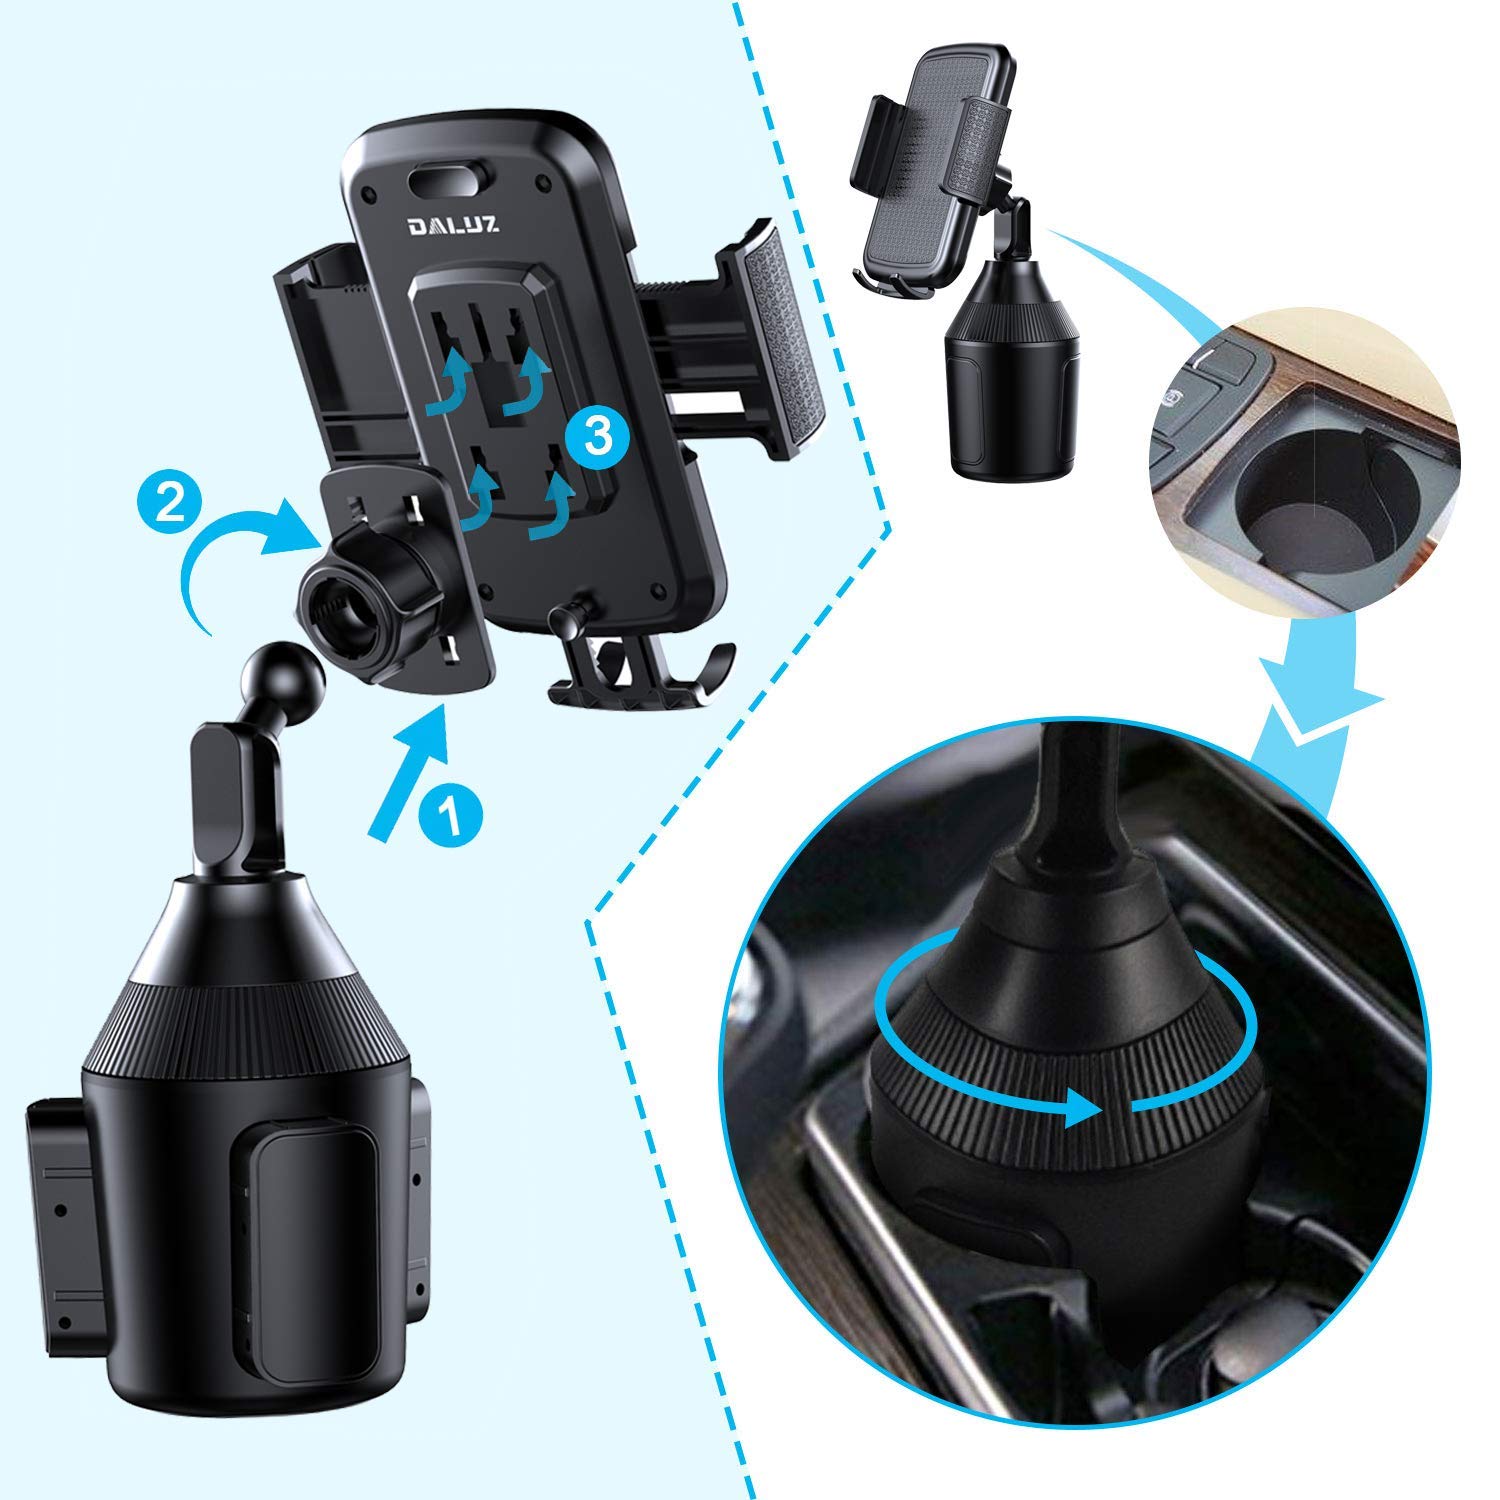 Cup Holder Phone Mount for Car Universal Adjustable Car Mount for iPhone 11 Pro Max/11 Pro/11/Xs/Max/X/XR/8/8/7/6 Plus,Note 10/Note 10+/Note 9/ S10+/ S10/ S9/ S9+/ S8 - image 4 of 6